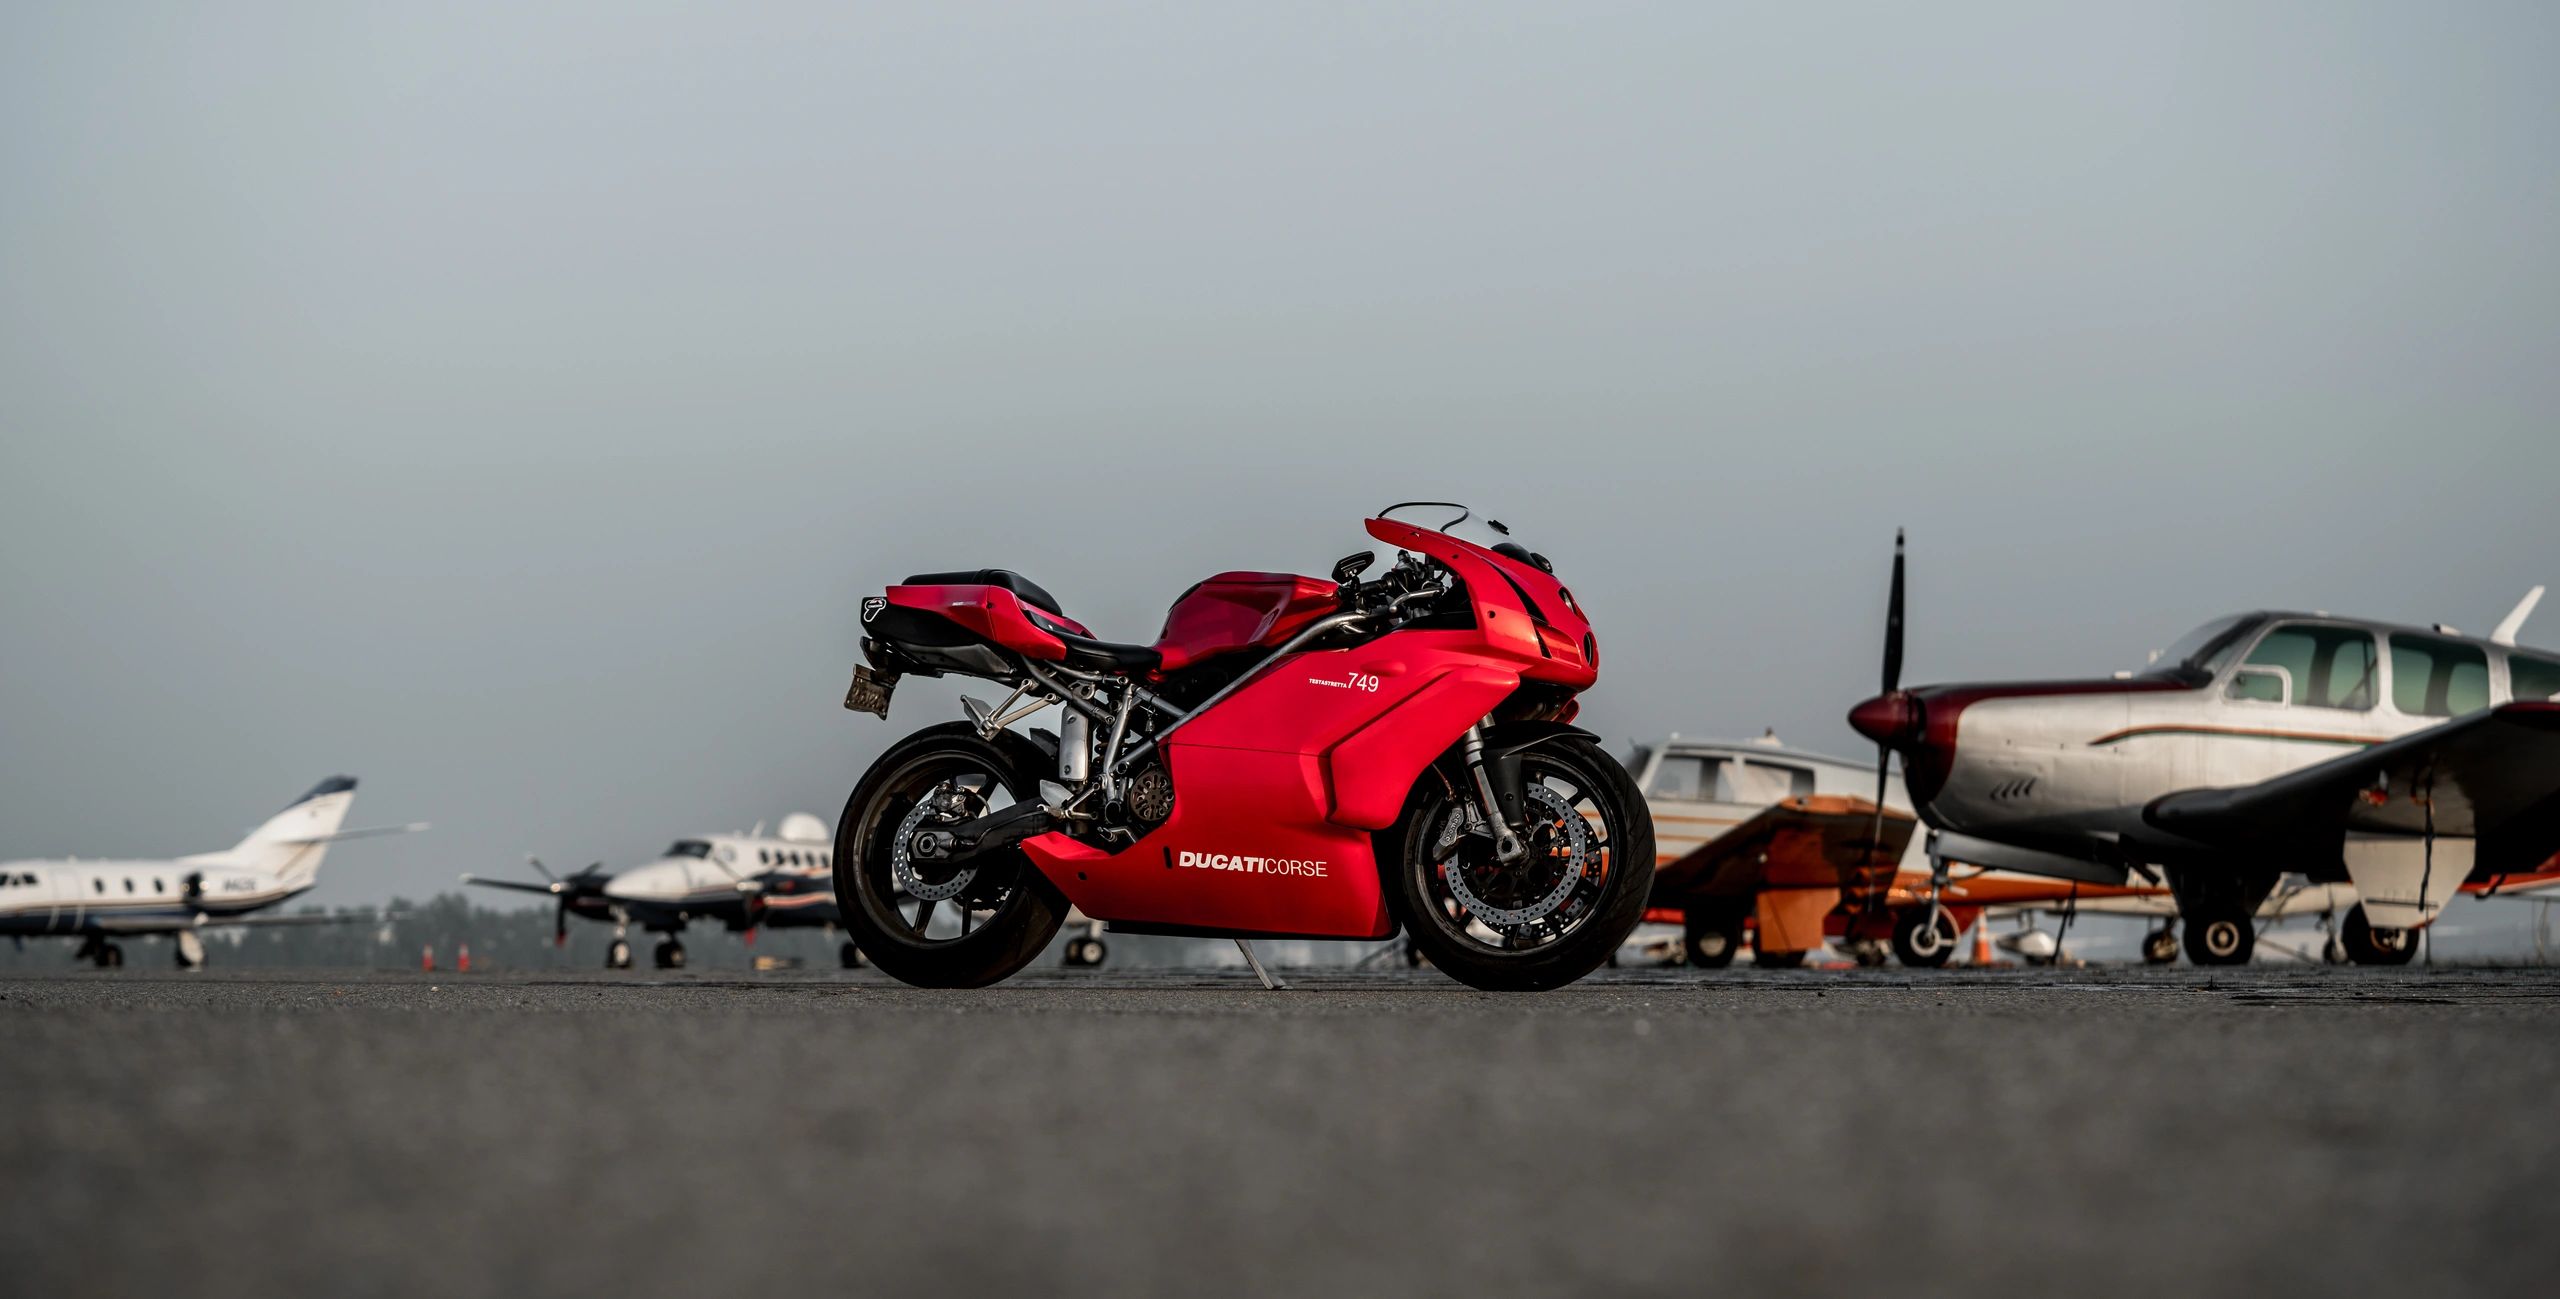 Red Ducati Motorcycle with Aircraft in the background